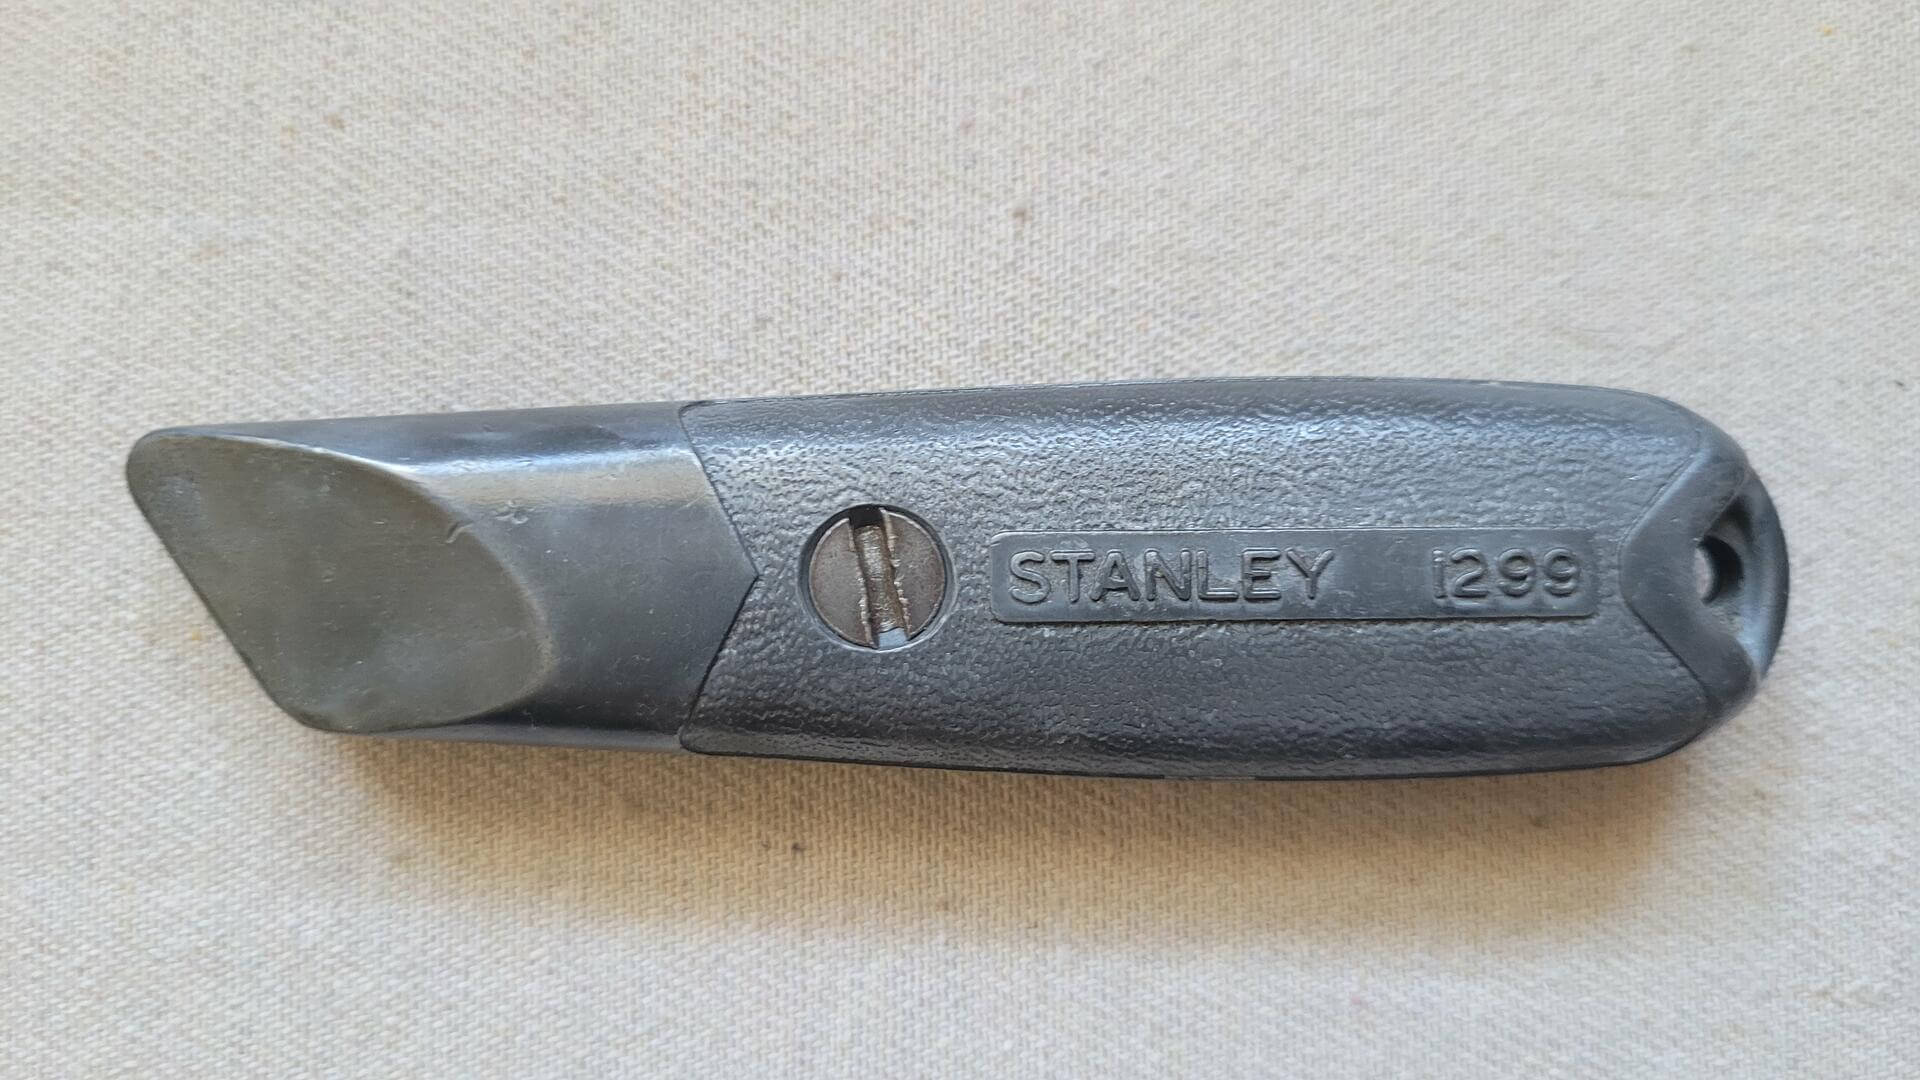 Vintage Stanley 1299 fixed blade cast steel utility knife box cutter. Antique made in USA collectible classic mid century design cutting hand tools